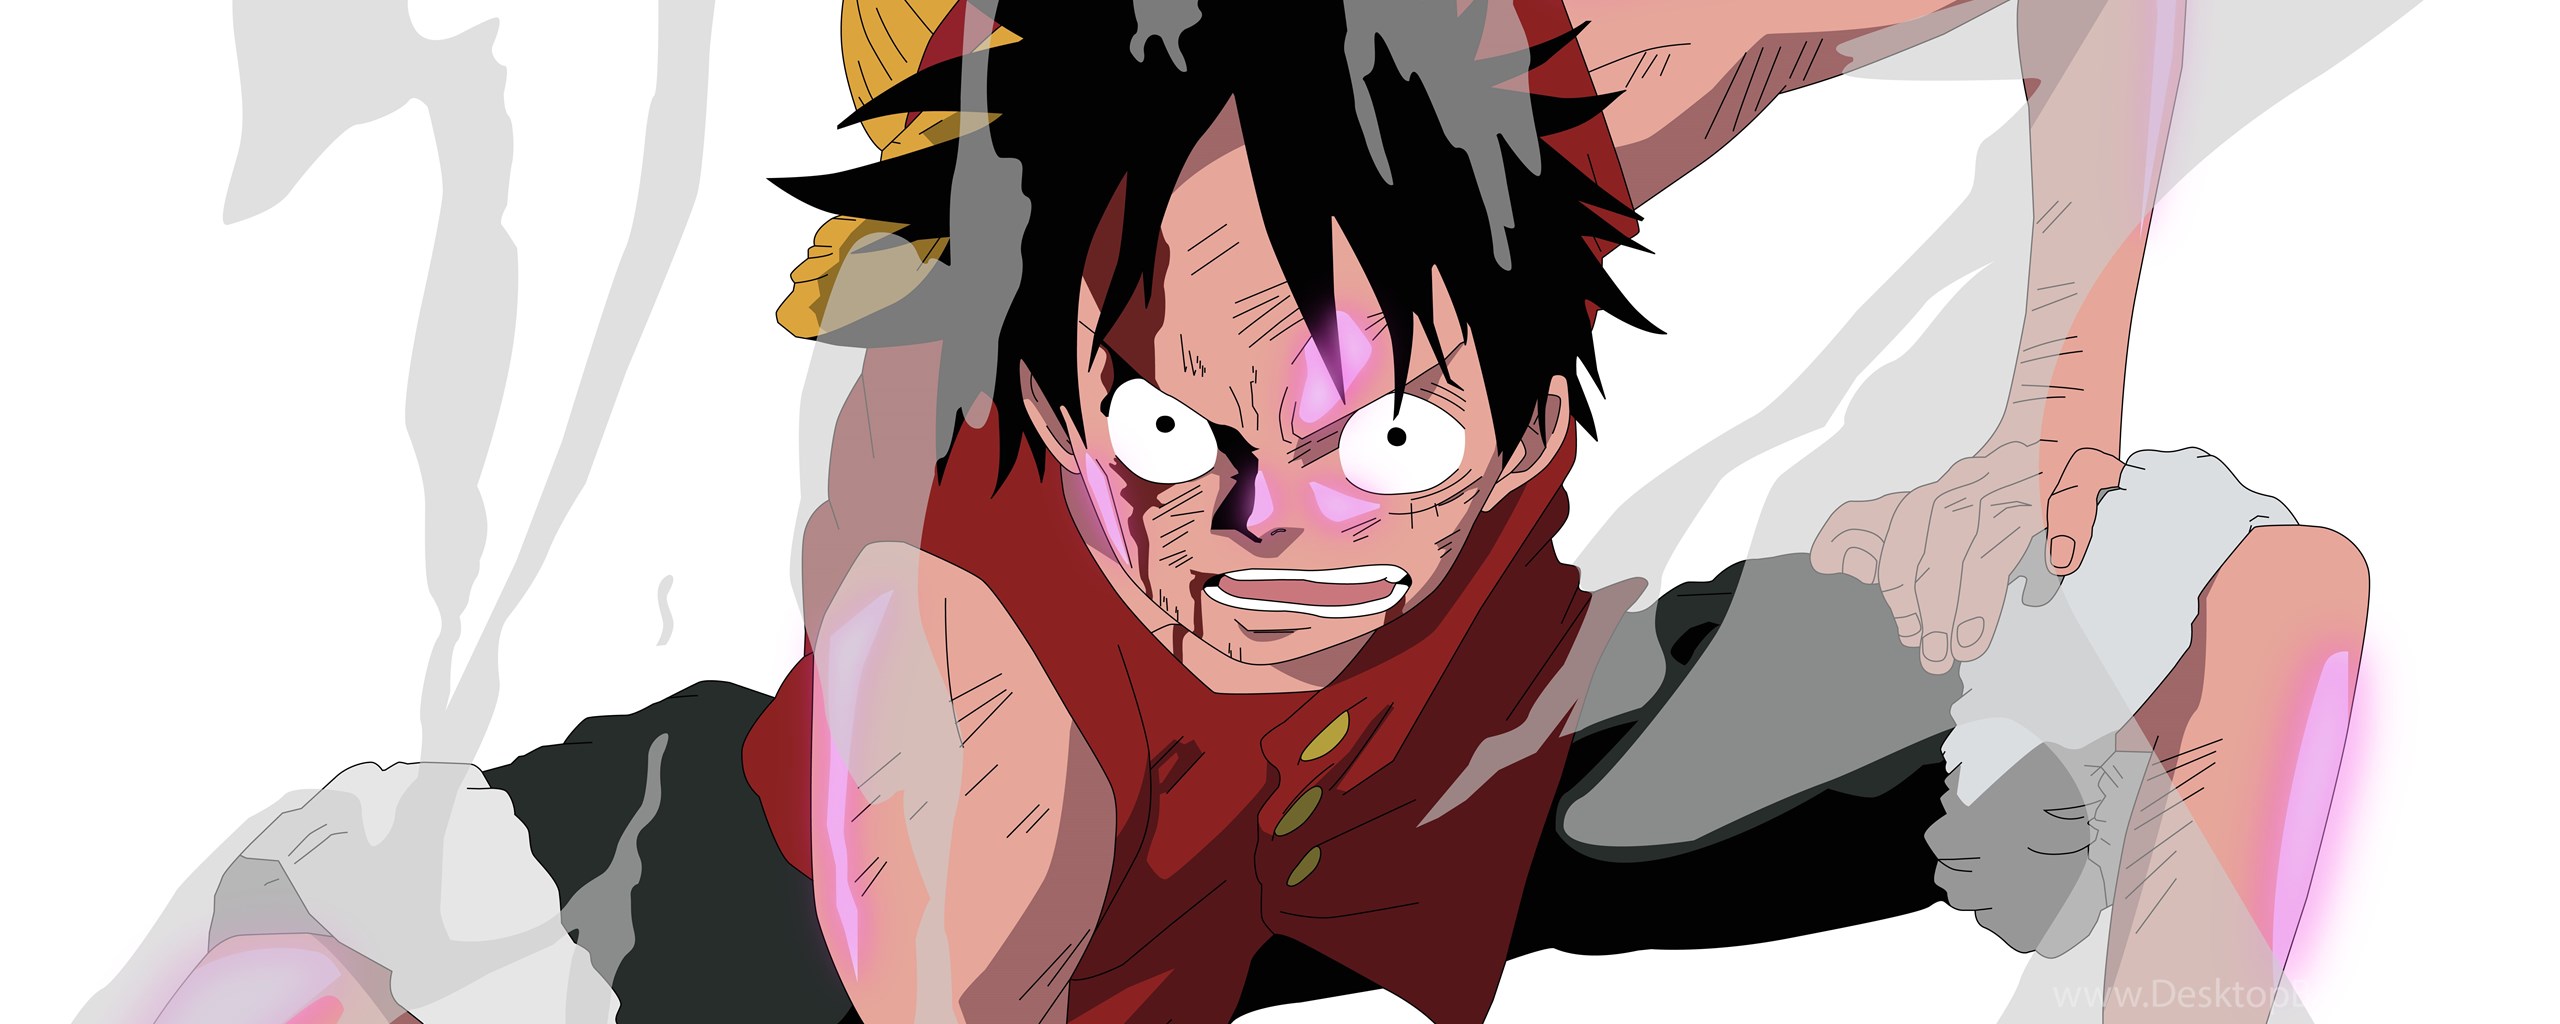 Anime Wallpaper One Piece Luffy Wallpapers Phone Hd Backgrounds Desktop Background